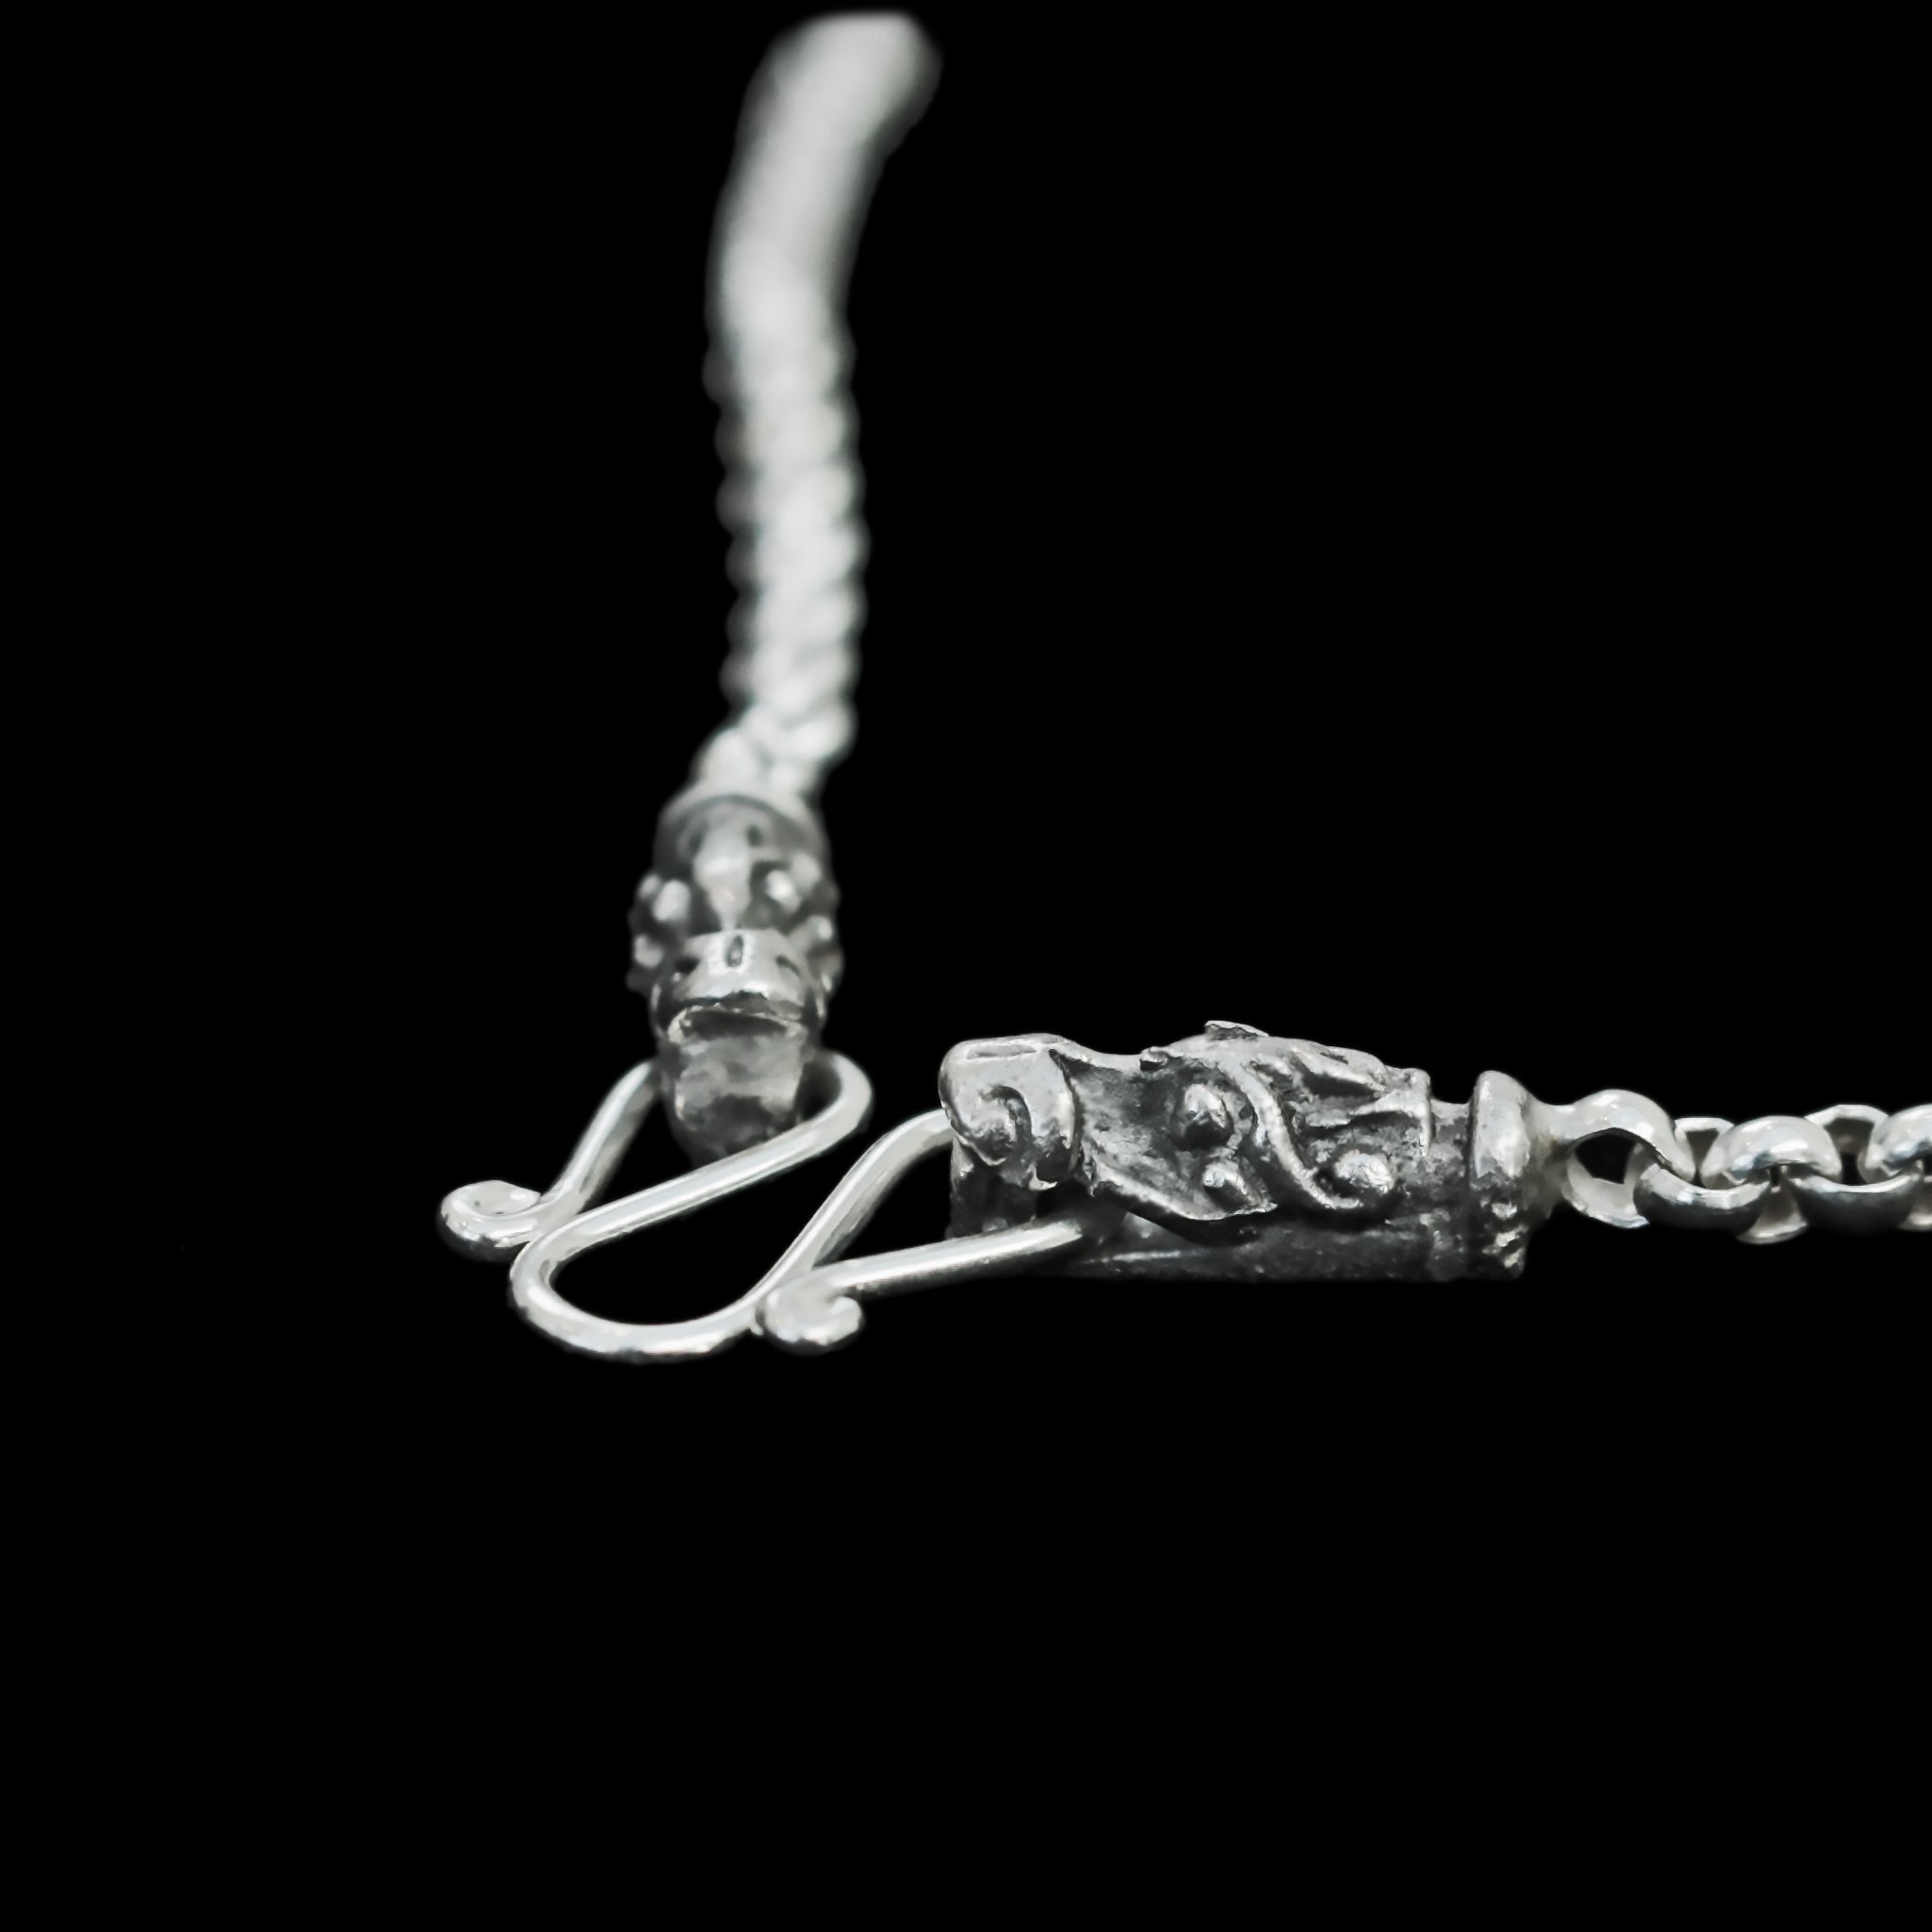 Slim Silver Anchor Chain Pendant Necklace with Gotland Dragon Heads Close Up